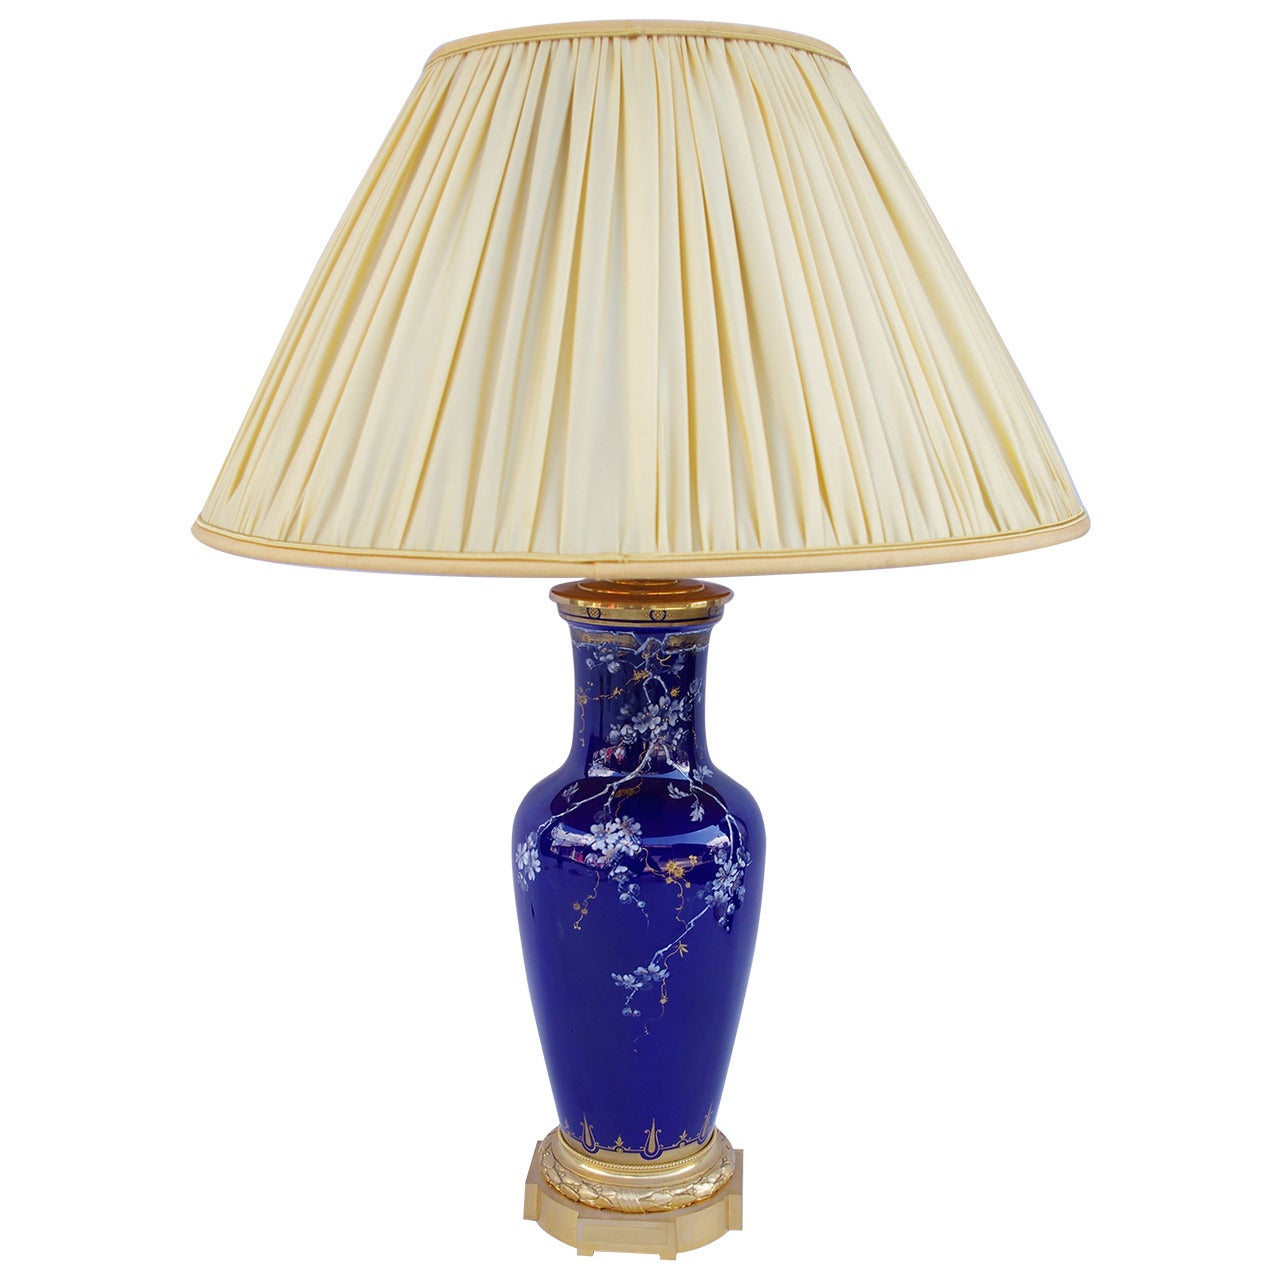 Blue porcelain lamp and gilt bronze, late 19th century